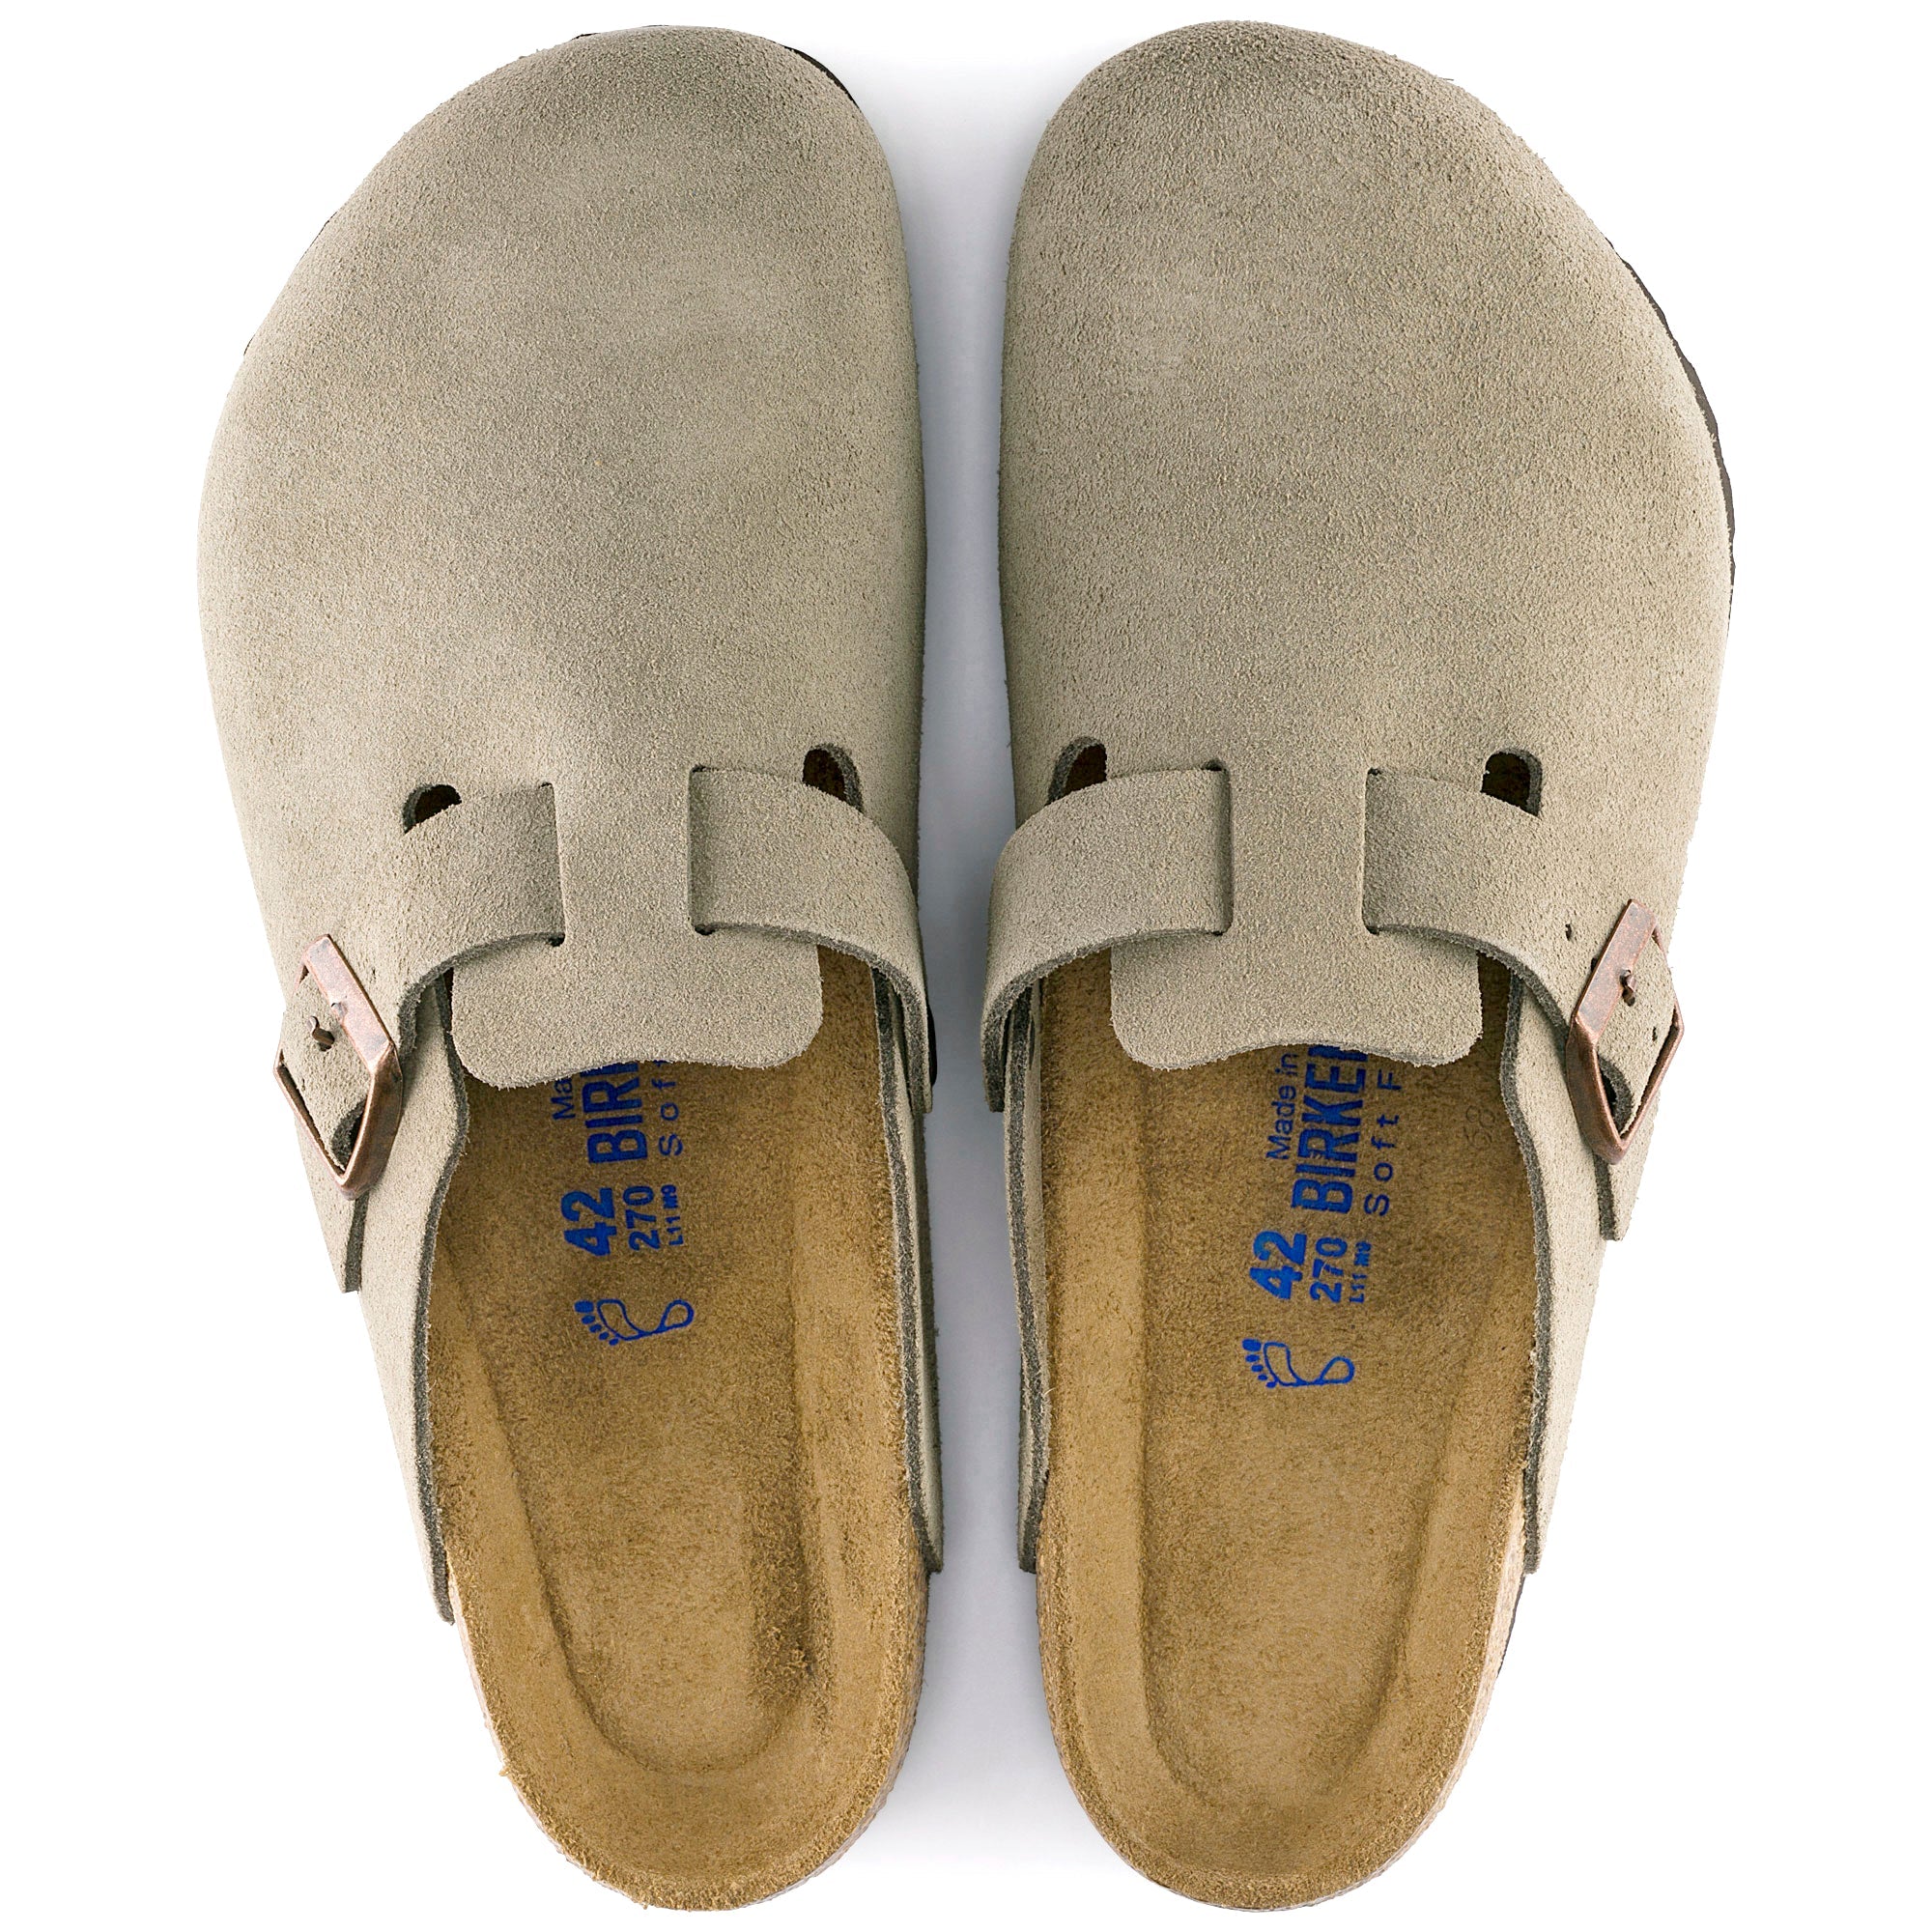 Birkenstock Boston Soft Footbed Suede Leather Color: Taupe (MEDIUM/NARROW WIDTH) 6